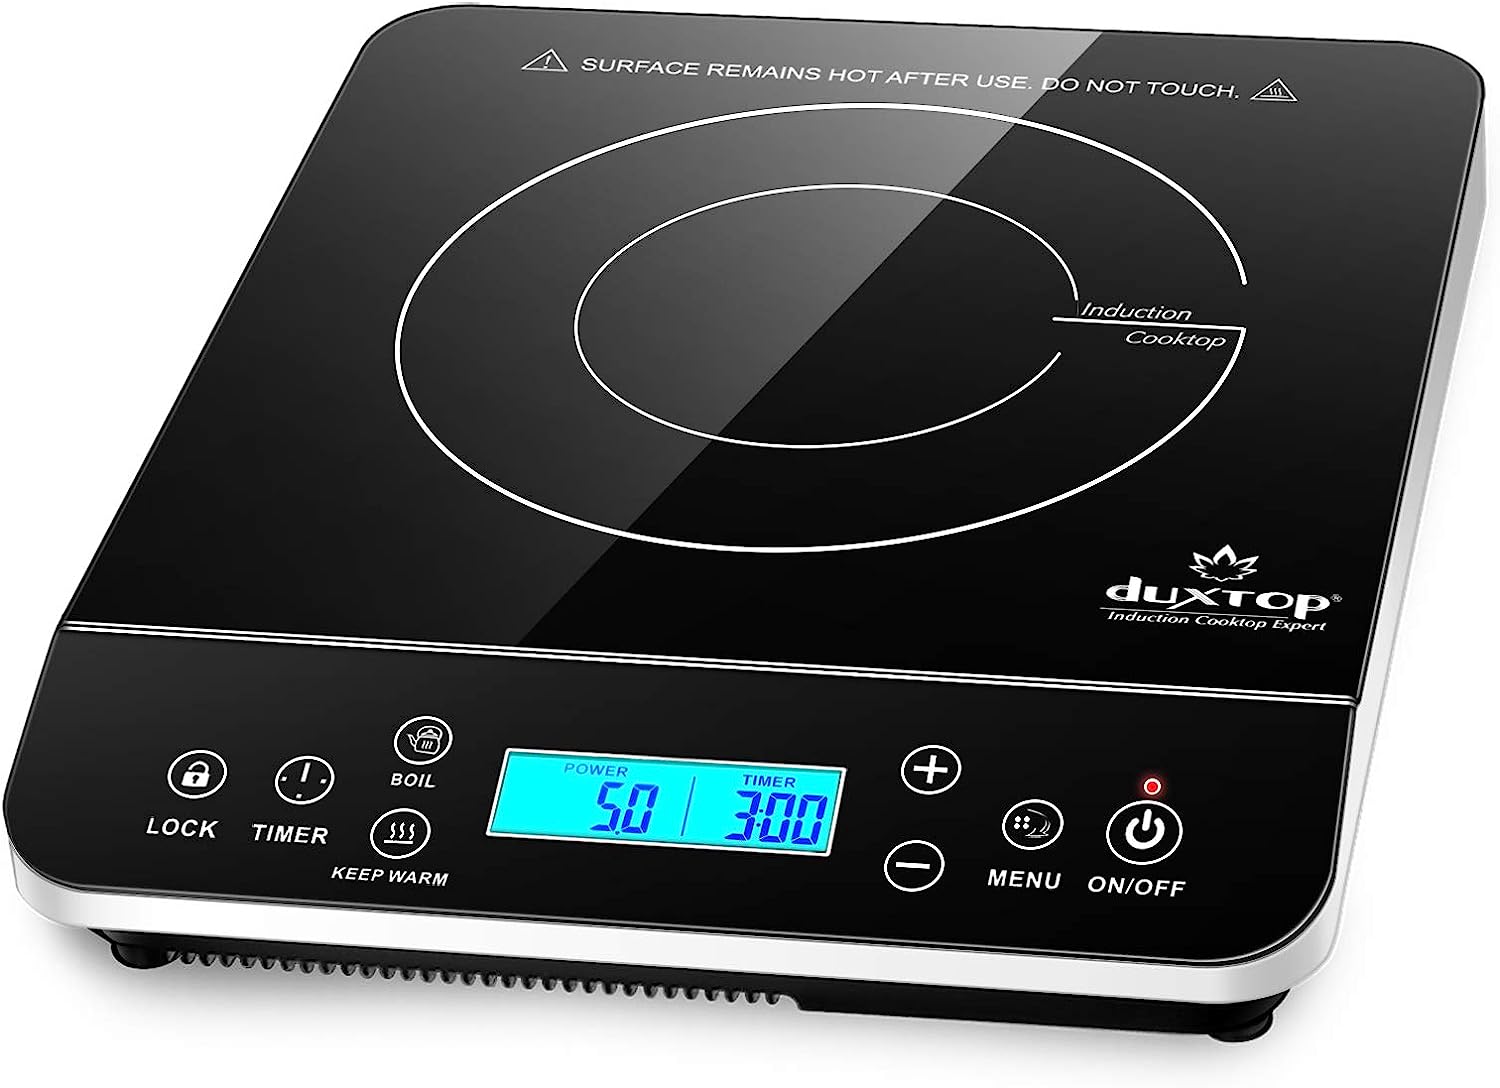 How To Use Duxtop Induction Cooktop